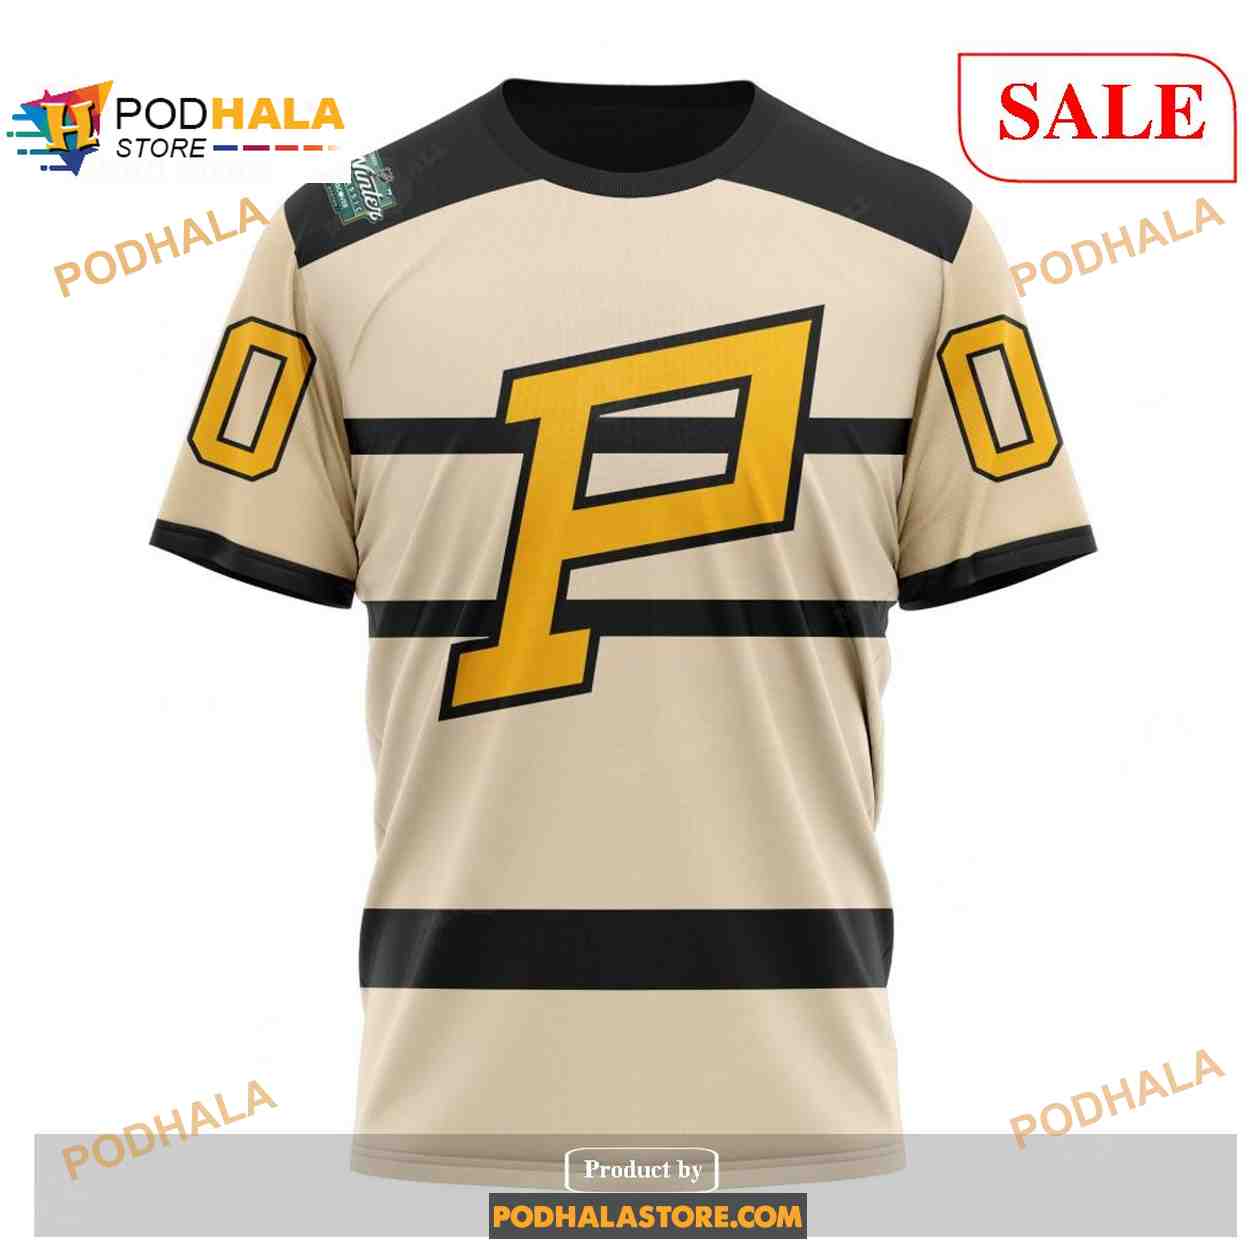 Penguins Winter Classic Jersey for sale